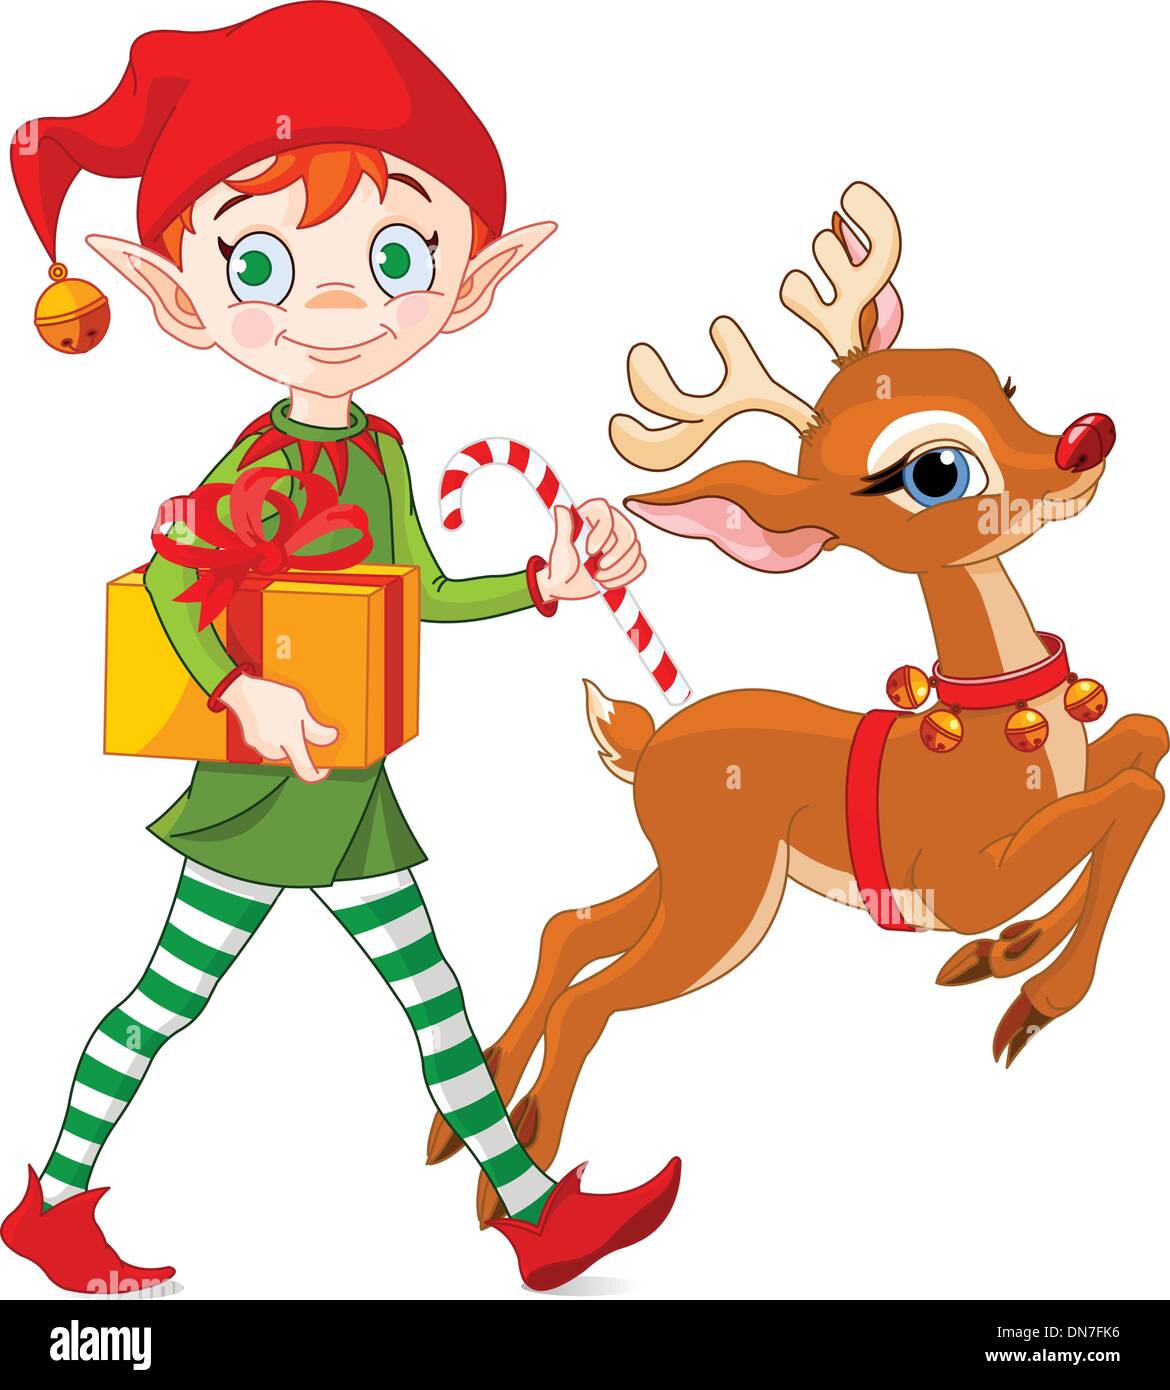 Christmas Elf and Rudolph Stock Vector